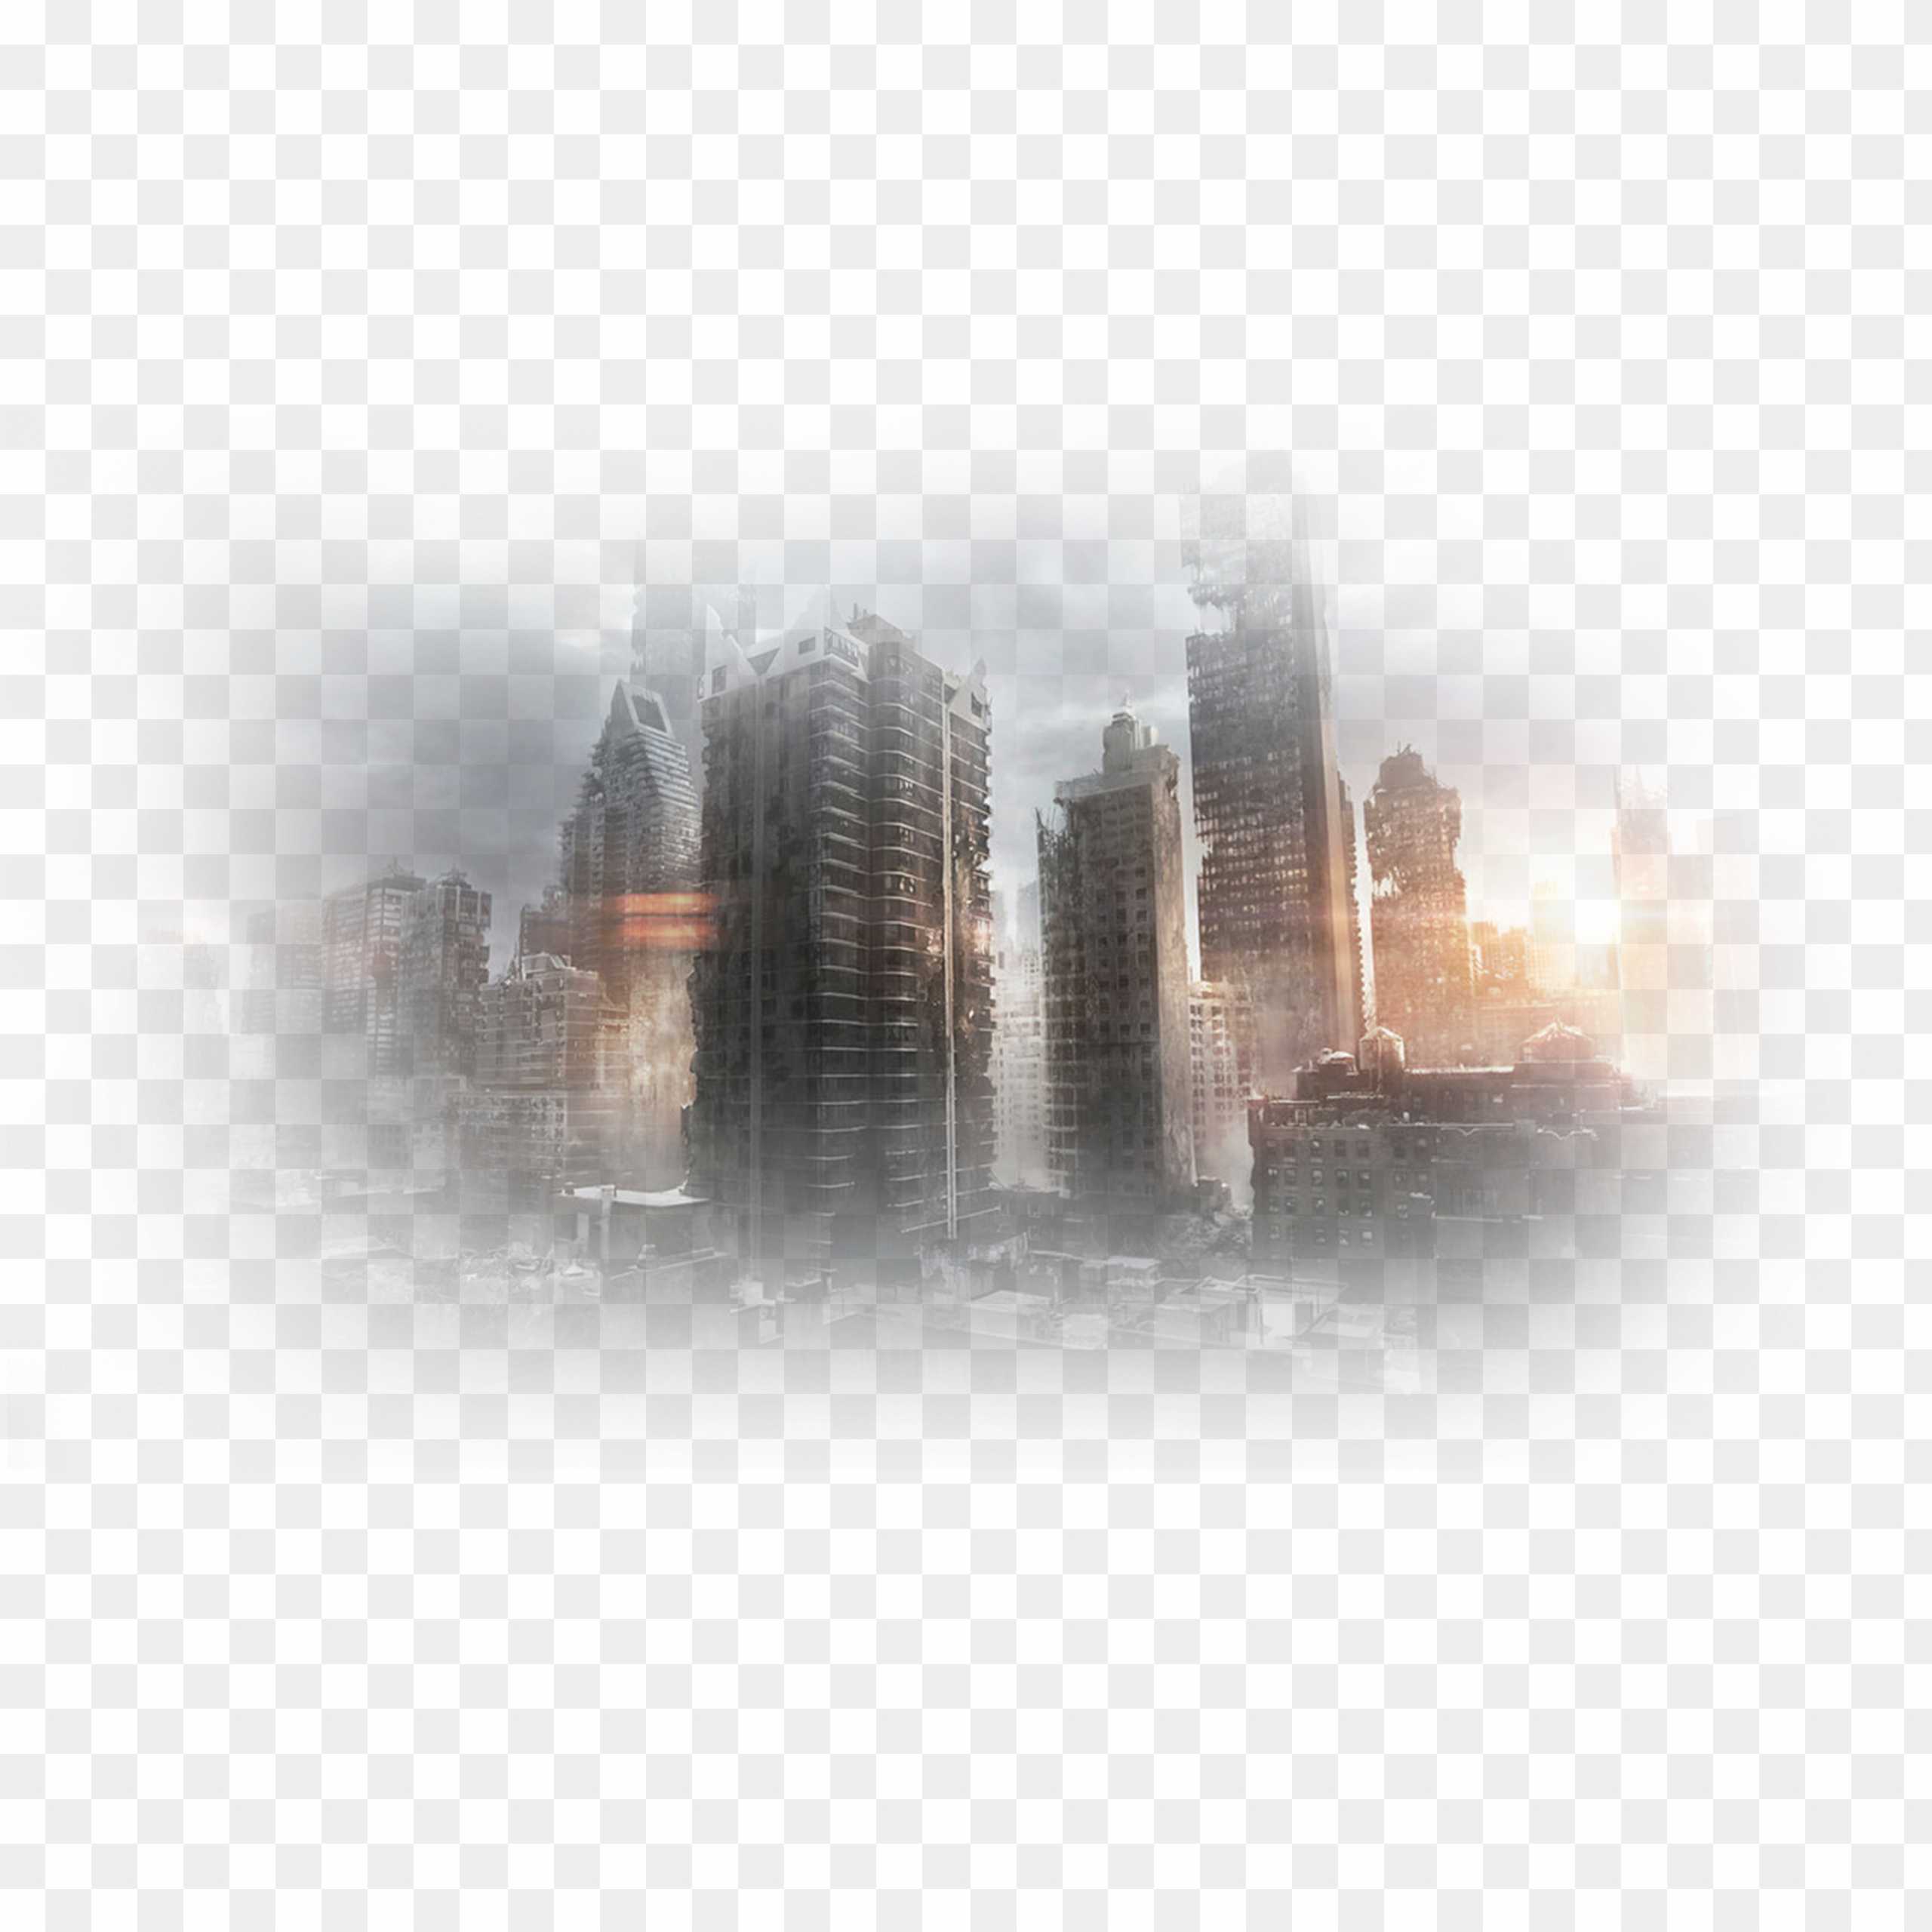 Background editing png transparent image